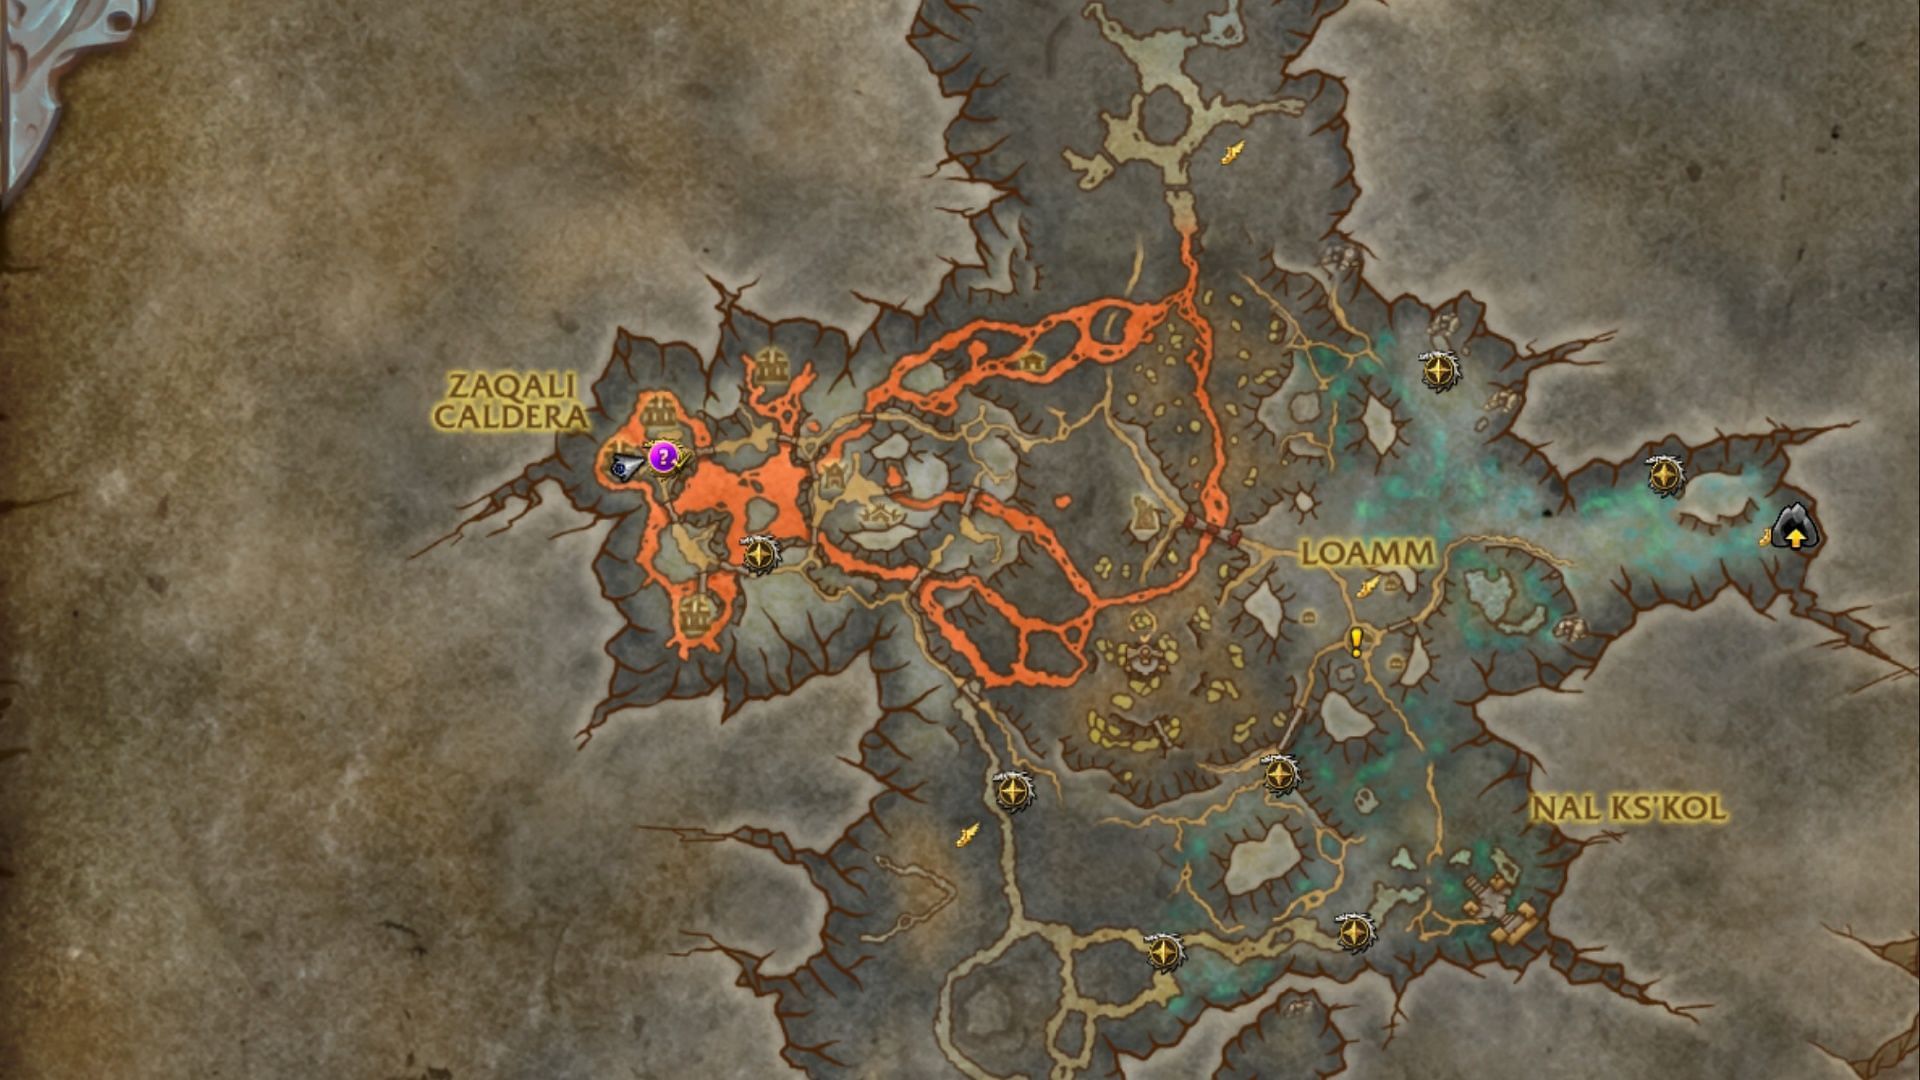 When the elite purple icon shows up on the map, the Zaqali Elders await in World of Warcraft: Dragonflight (Image via Blizzard Games)